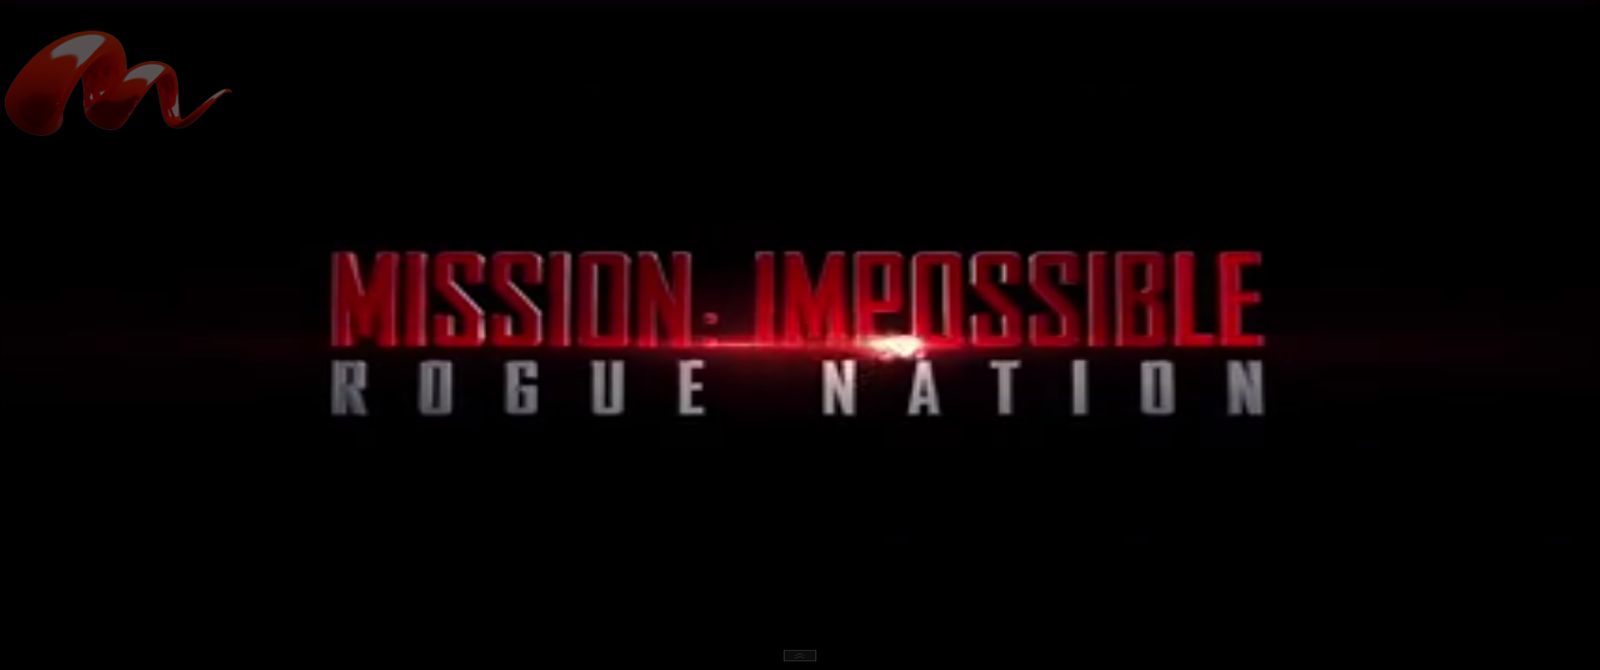 Mission: Impossible - Rogue Nation (English) Hindi Dubbed Torrent Download